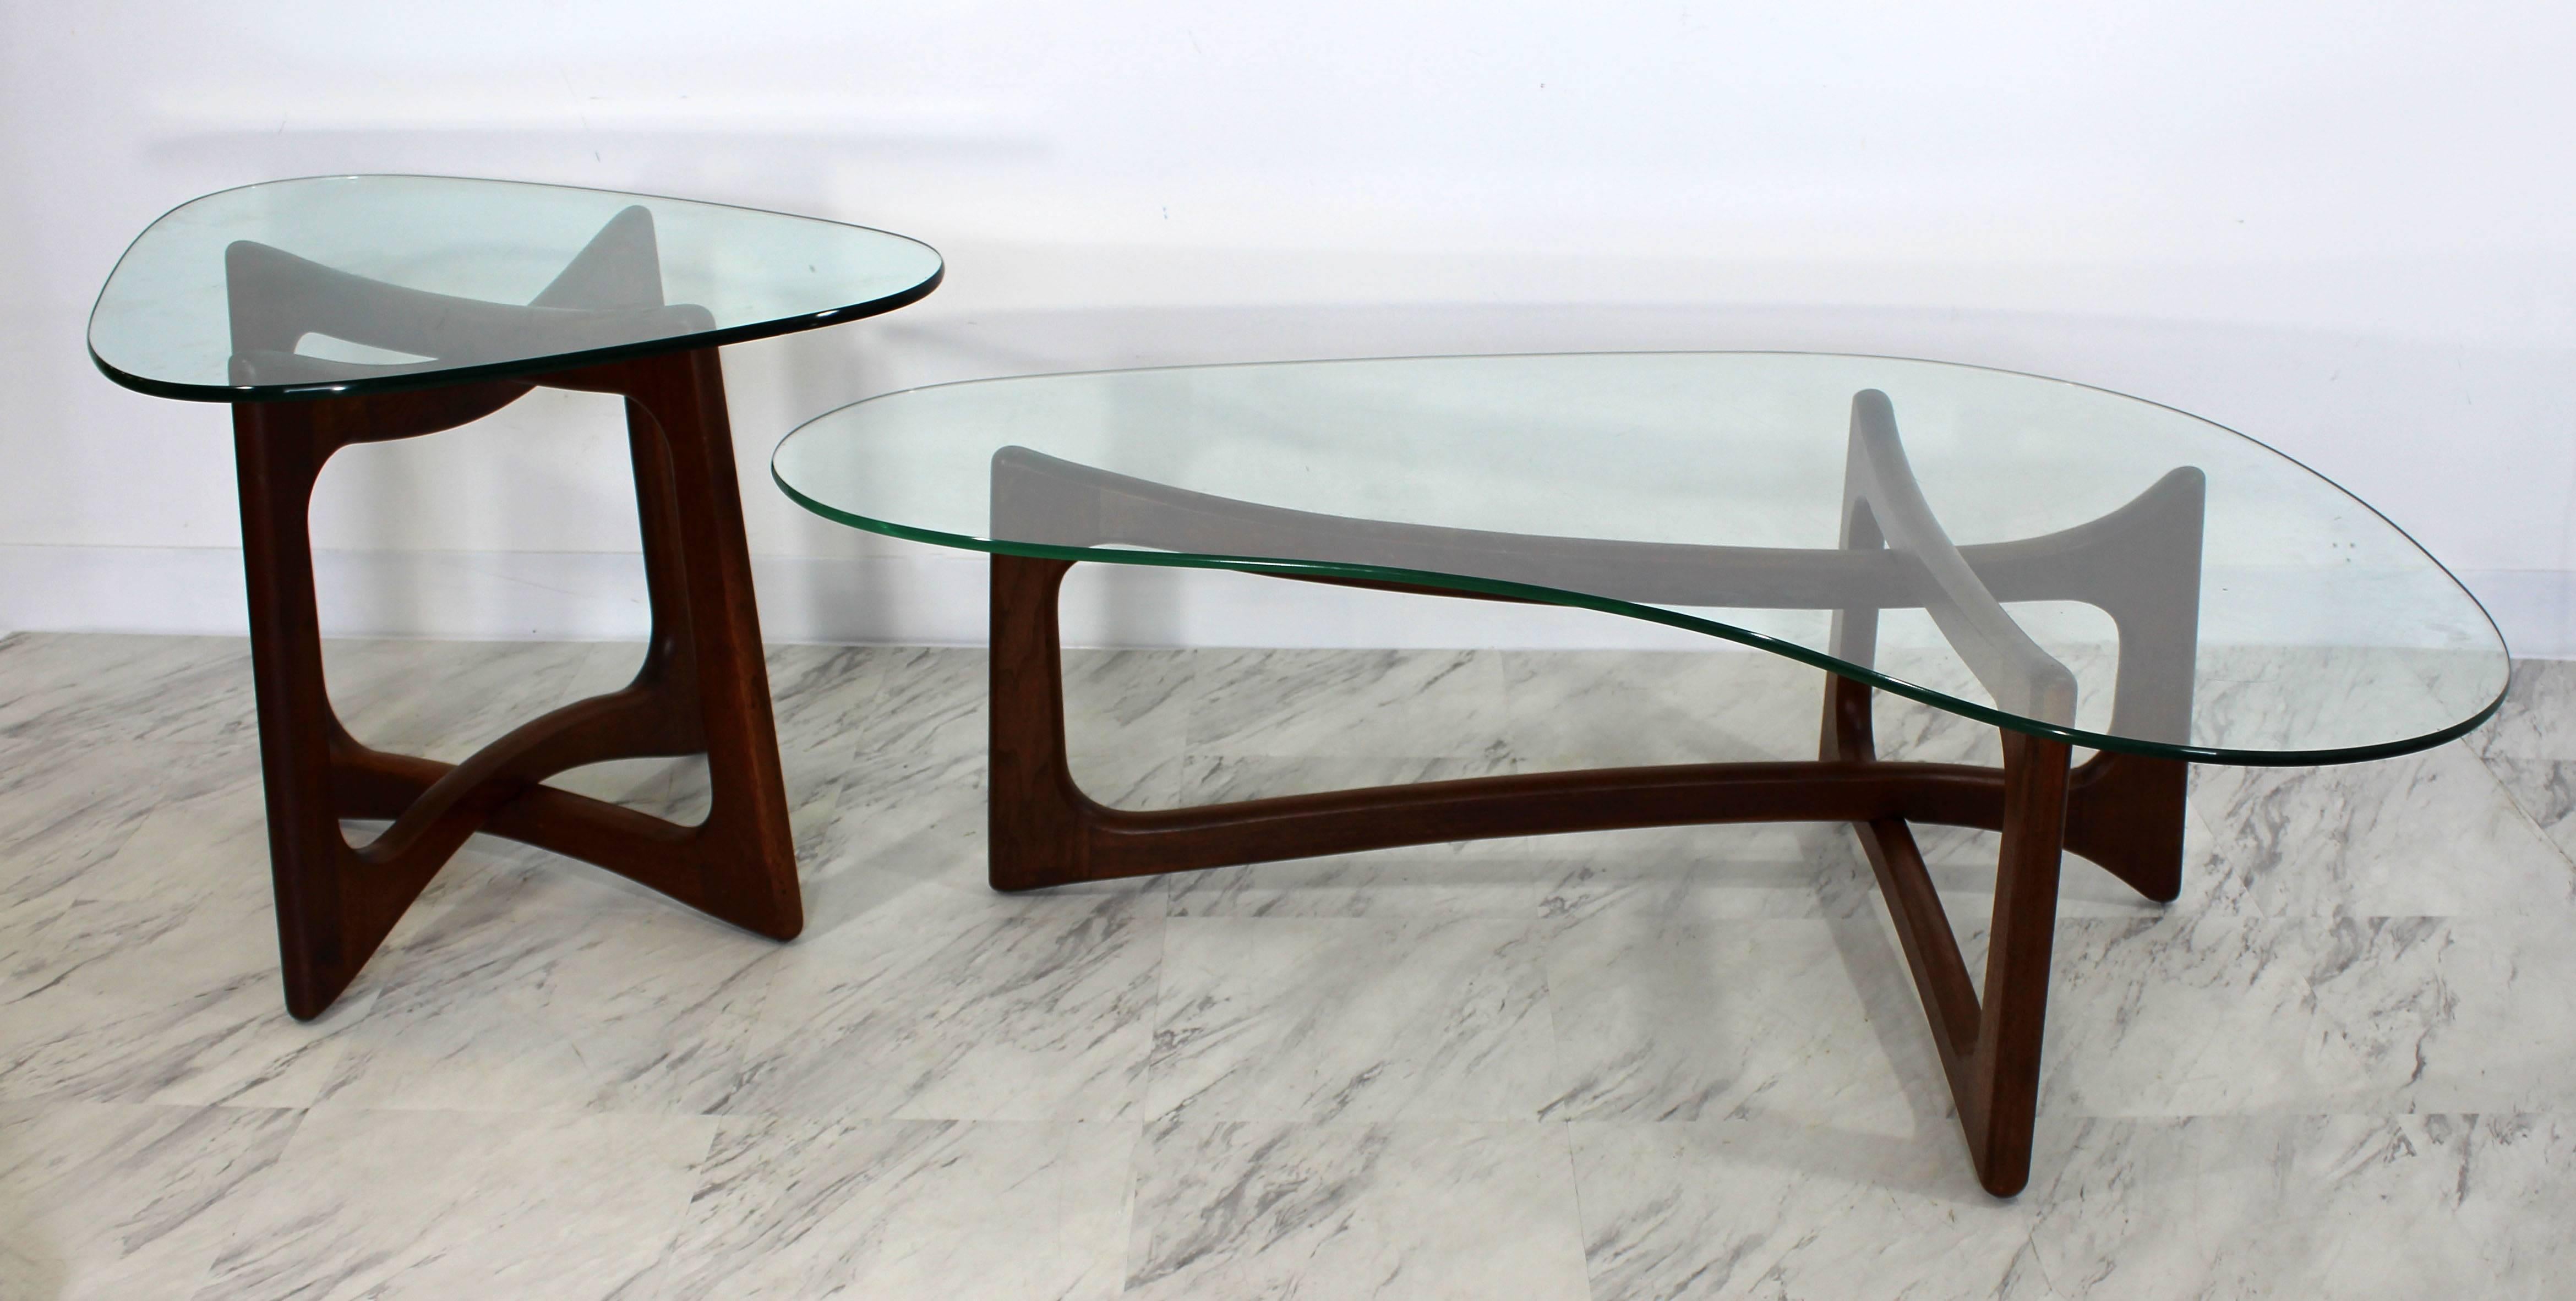 For your consideration is a phenomenal pair of sculptural, walnut and glass, tables, one boomerang kidney coffee table and one interlocking, cube side table, by Adrian Pearsall in the 1960s. In excellent condition, with minor scratching on the